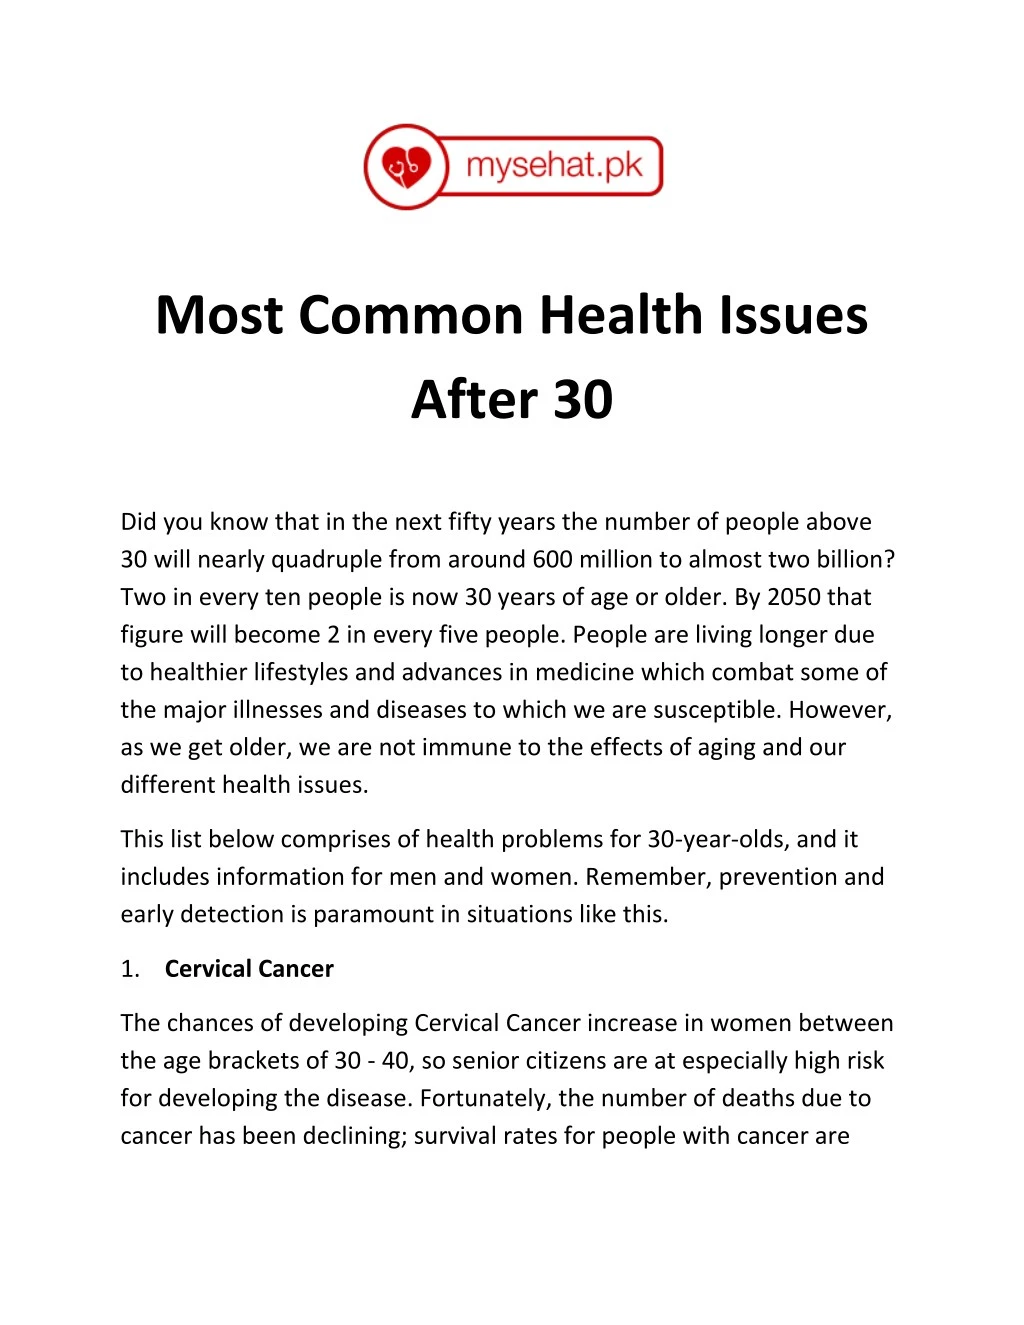 most common health issues after 30